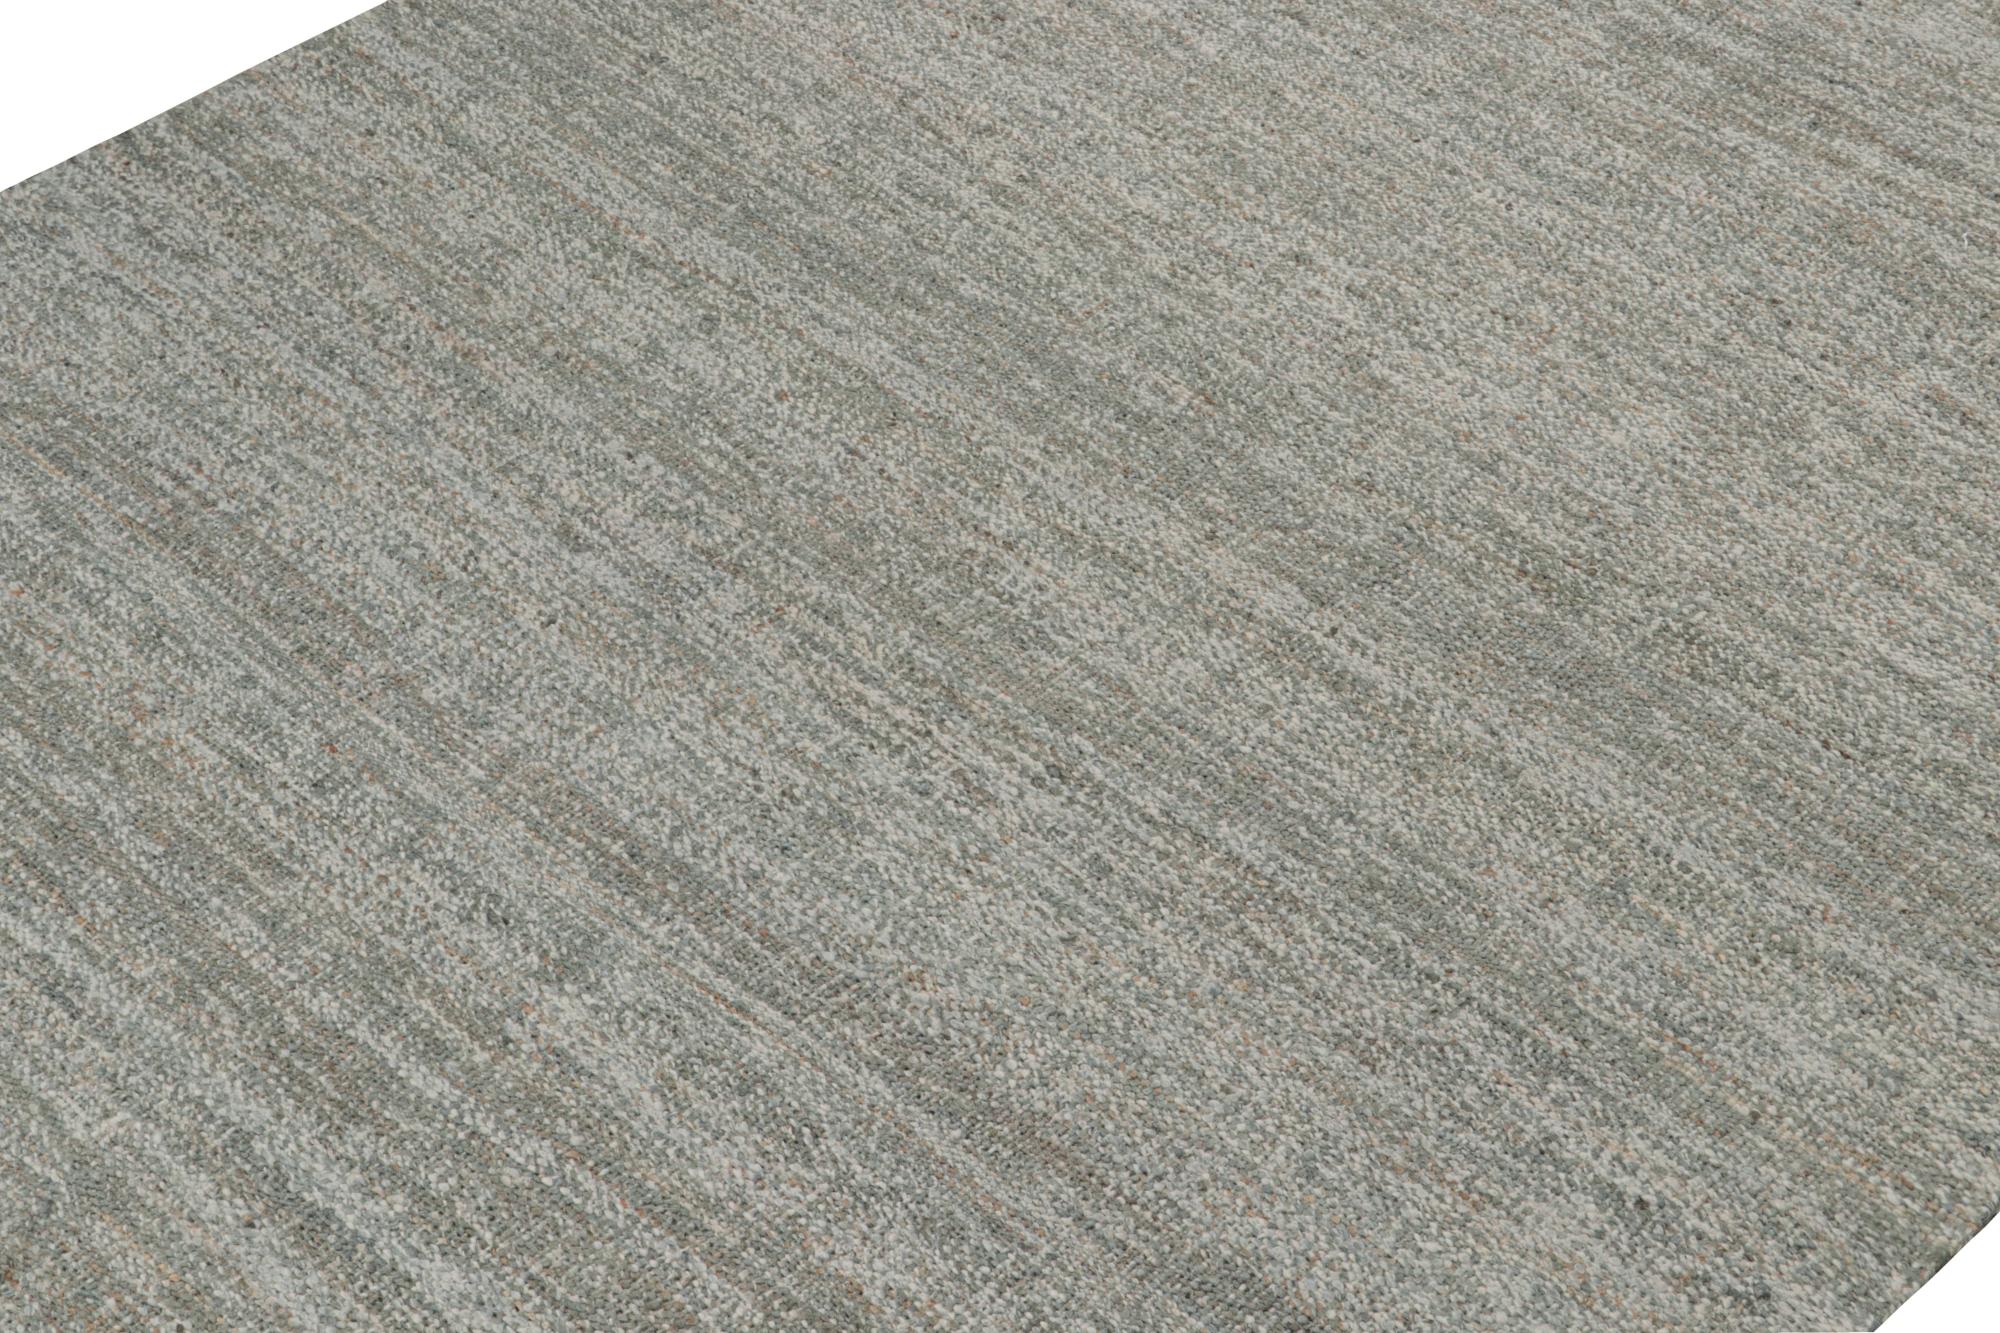 This contemporary 9x12 flatweave belongs to Rug & Kilim’s brand new collection—handwoven in all-natural jute.

On the Design: 

This oversized Kilim enjoys a tasteful boucle-like texture and sense of movement for a smart take on plain rugs. A keen